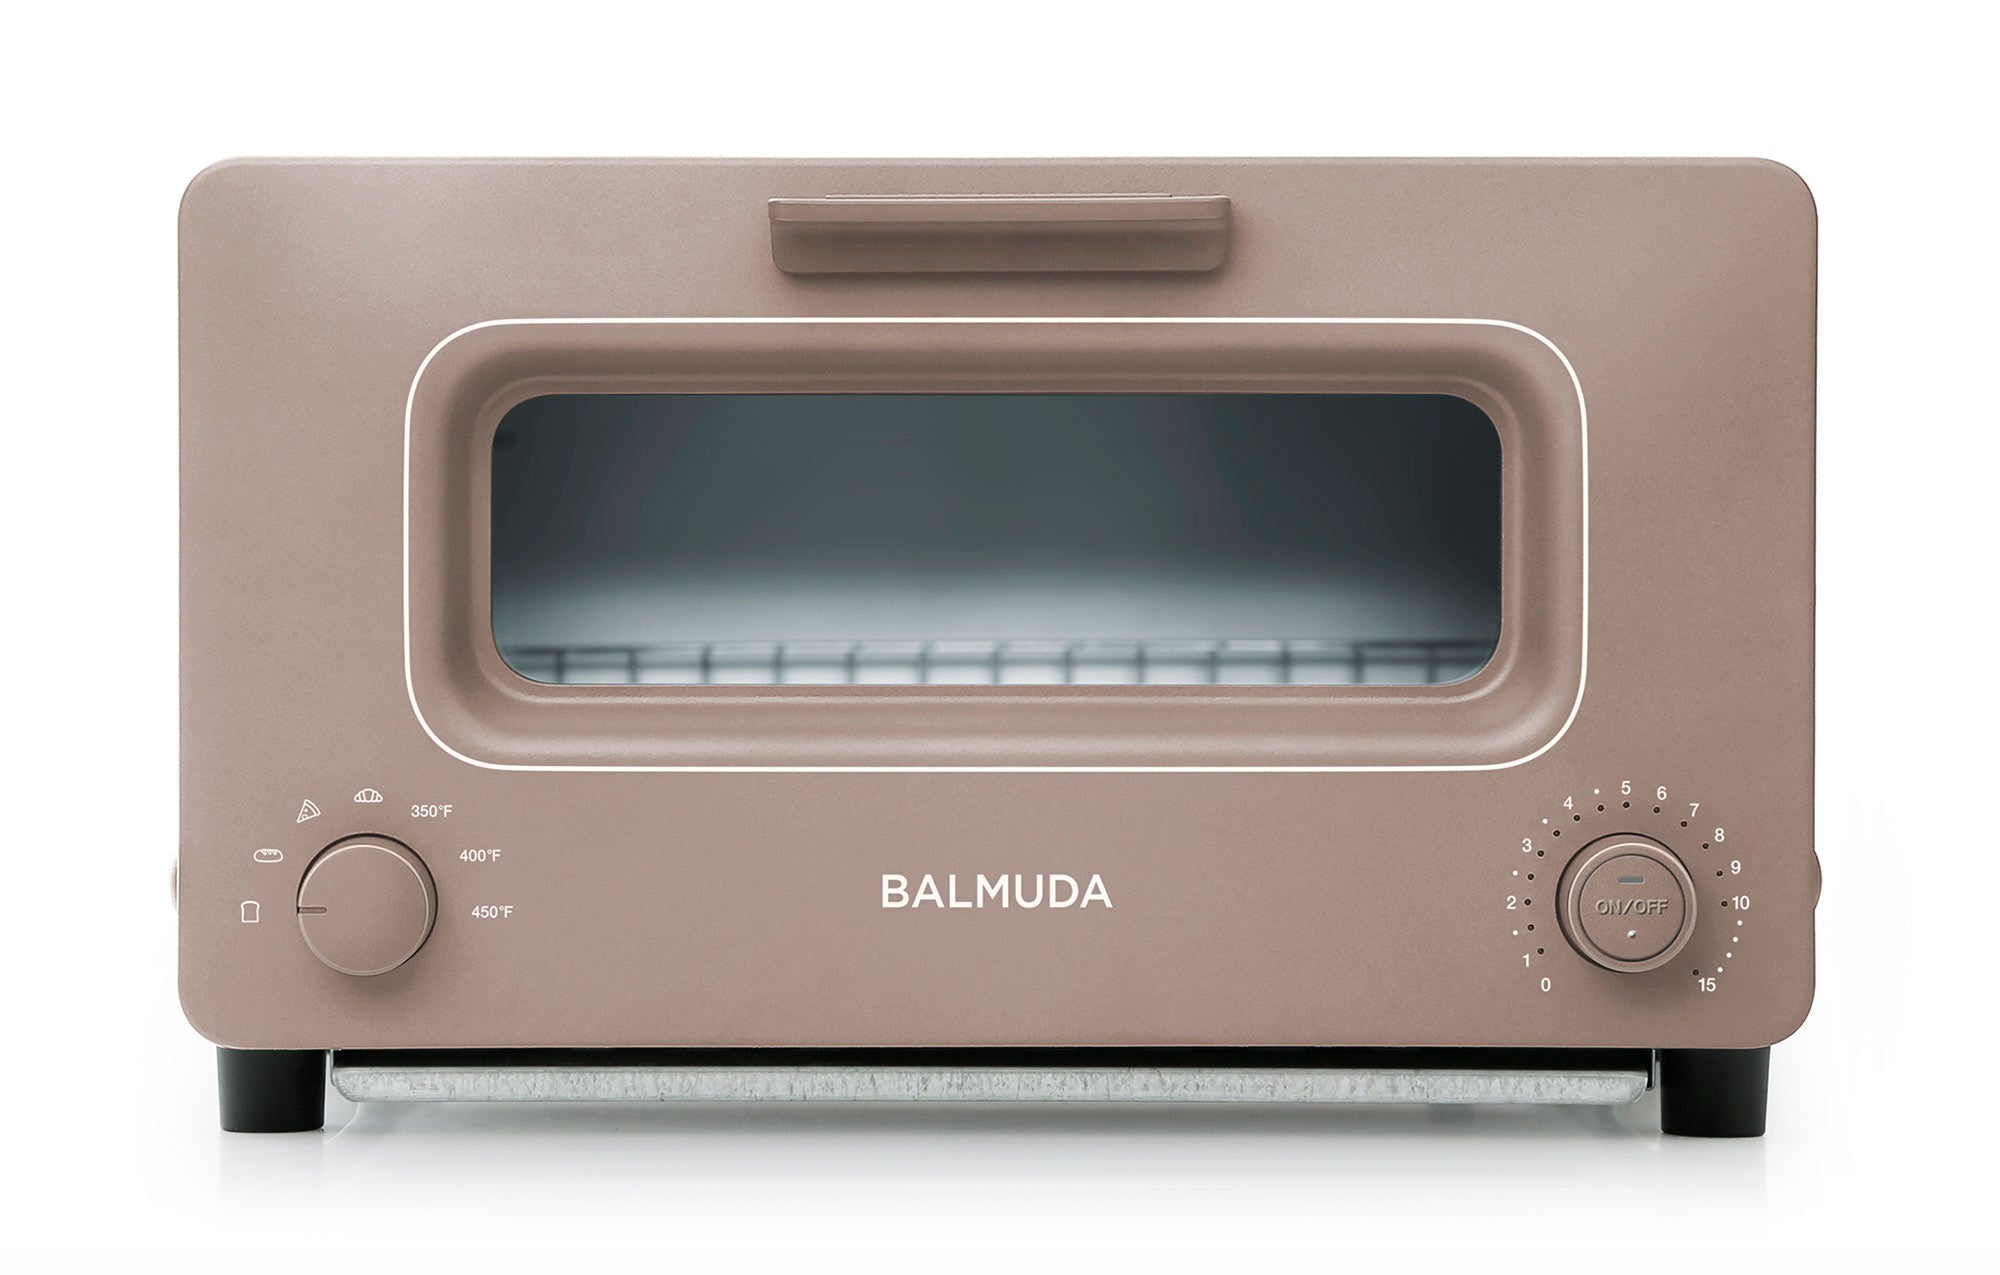 Balmuda the Toaster review: It's worth the hype if you have $300 to spend